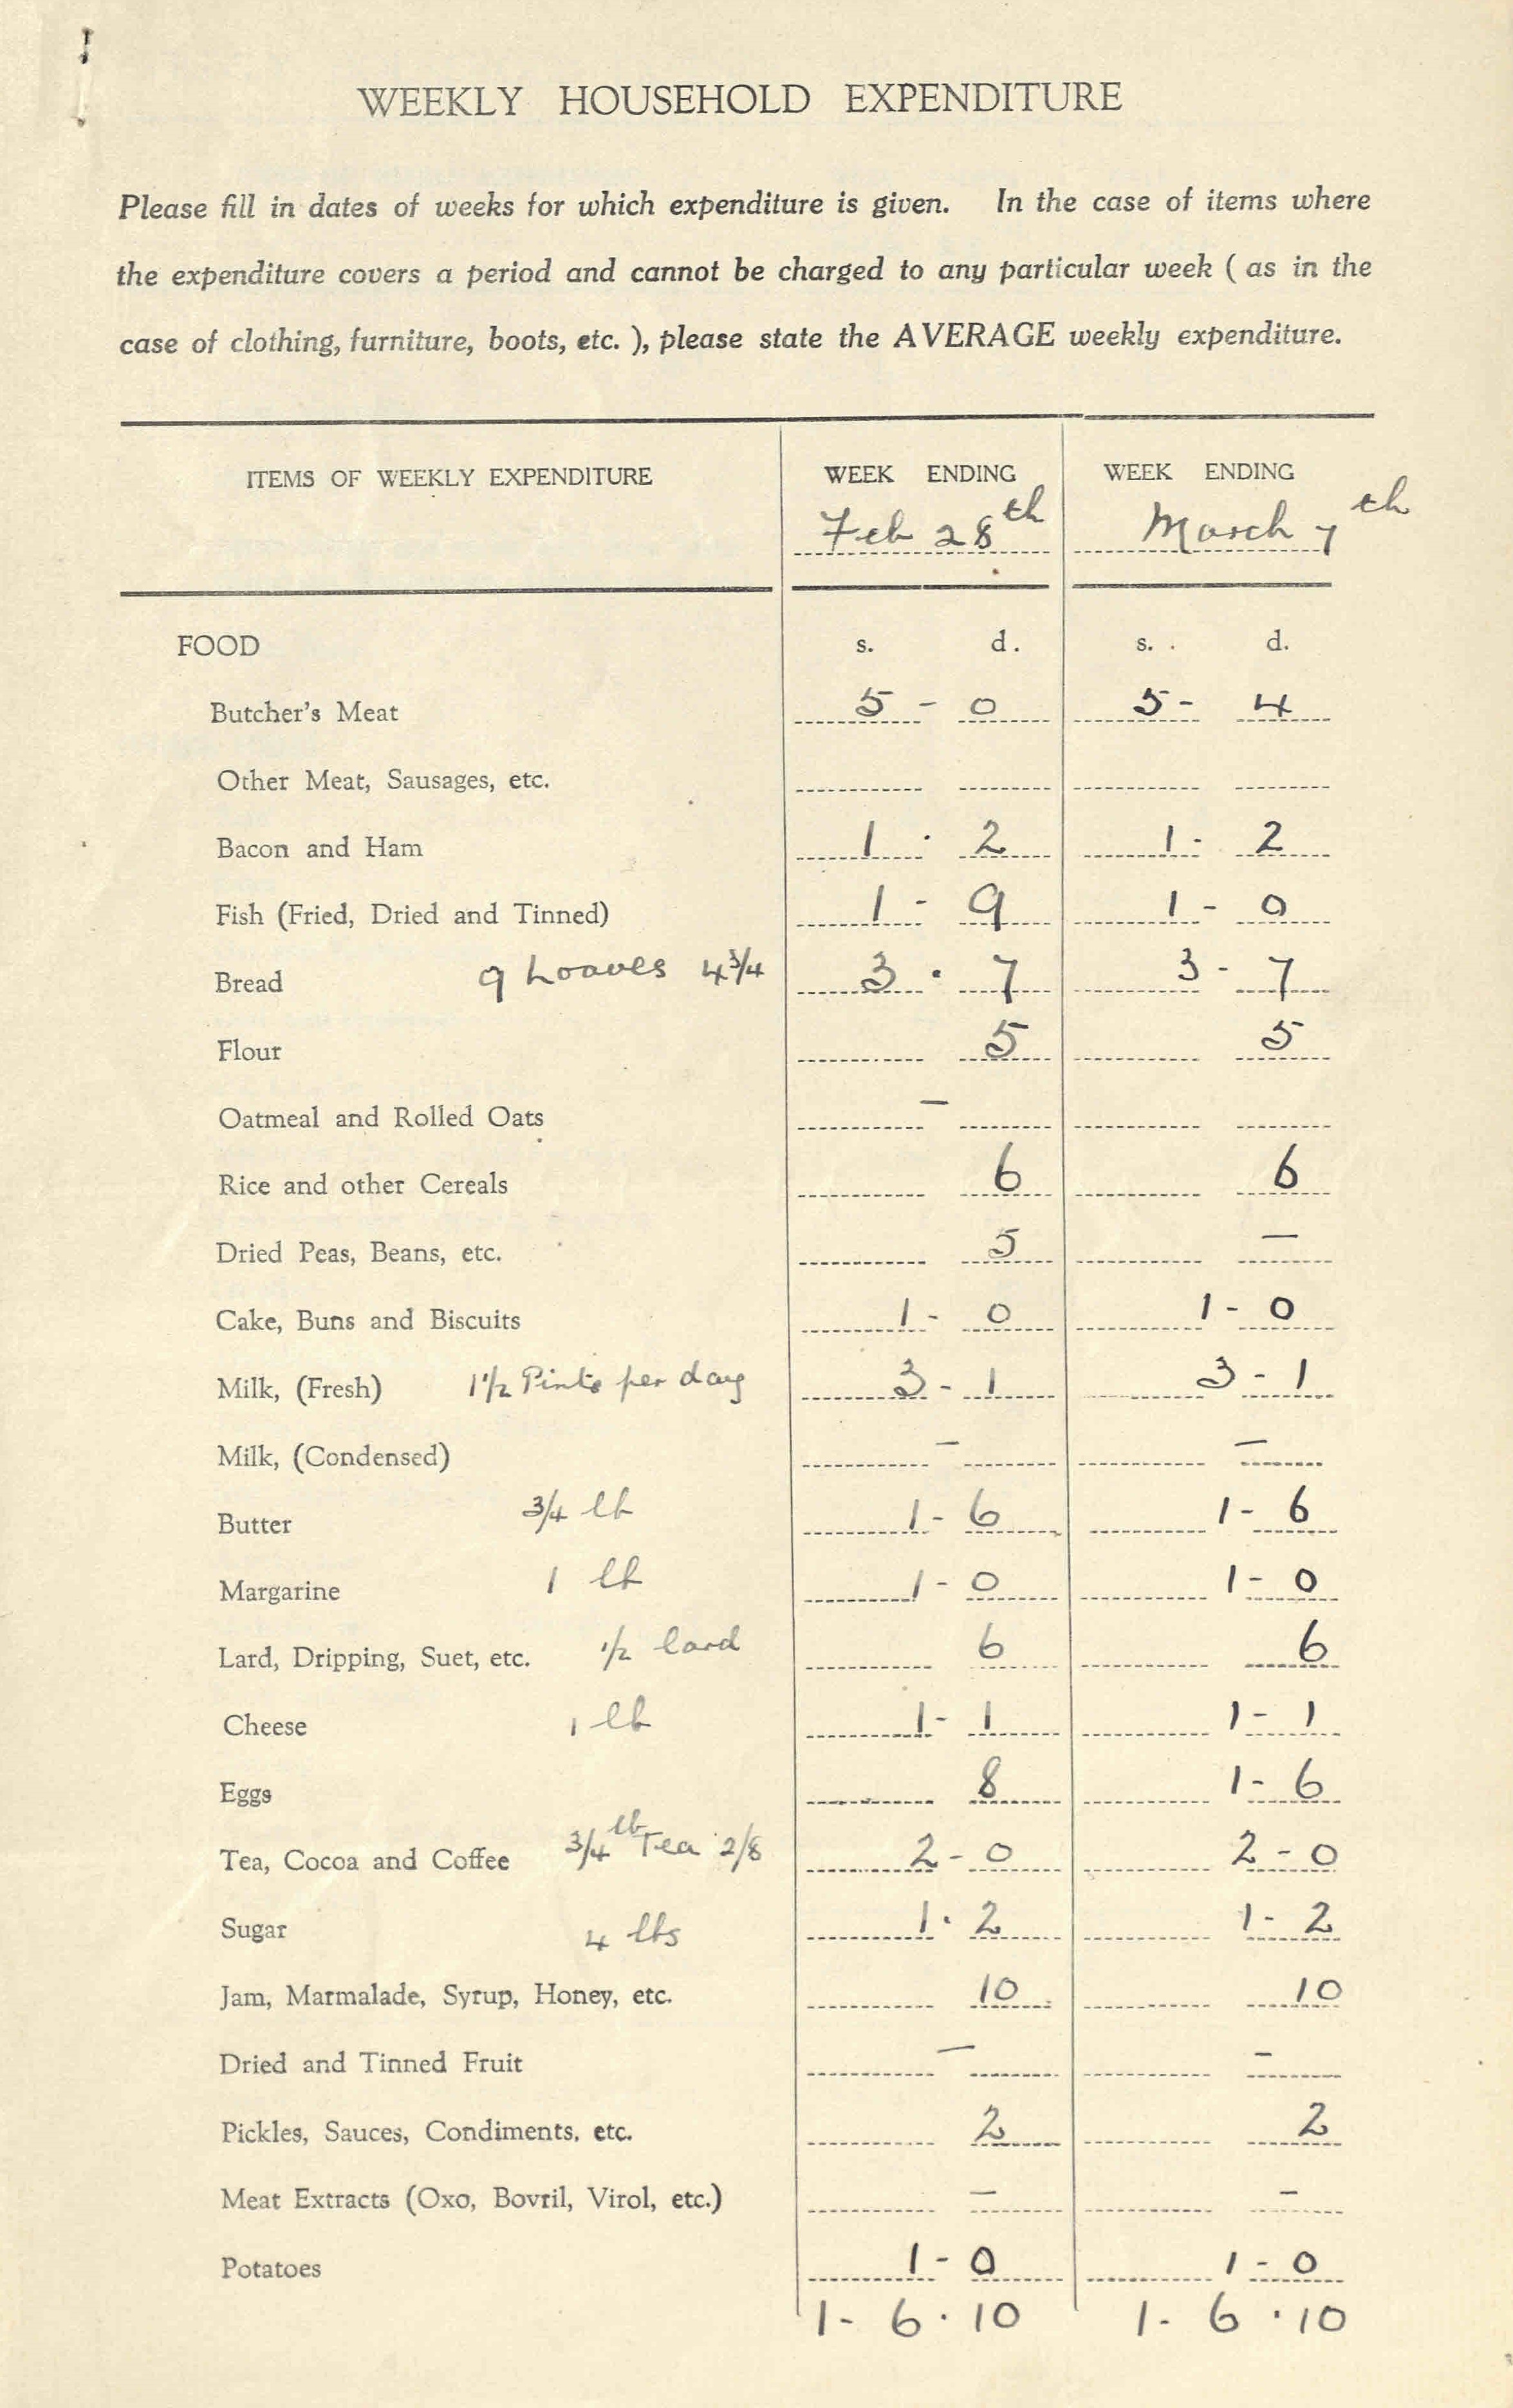 Form submitted by a Leicester postman for the Union of Post Office Workers' standard of living enquiry, 1926